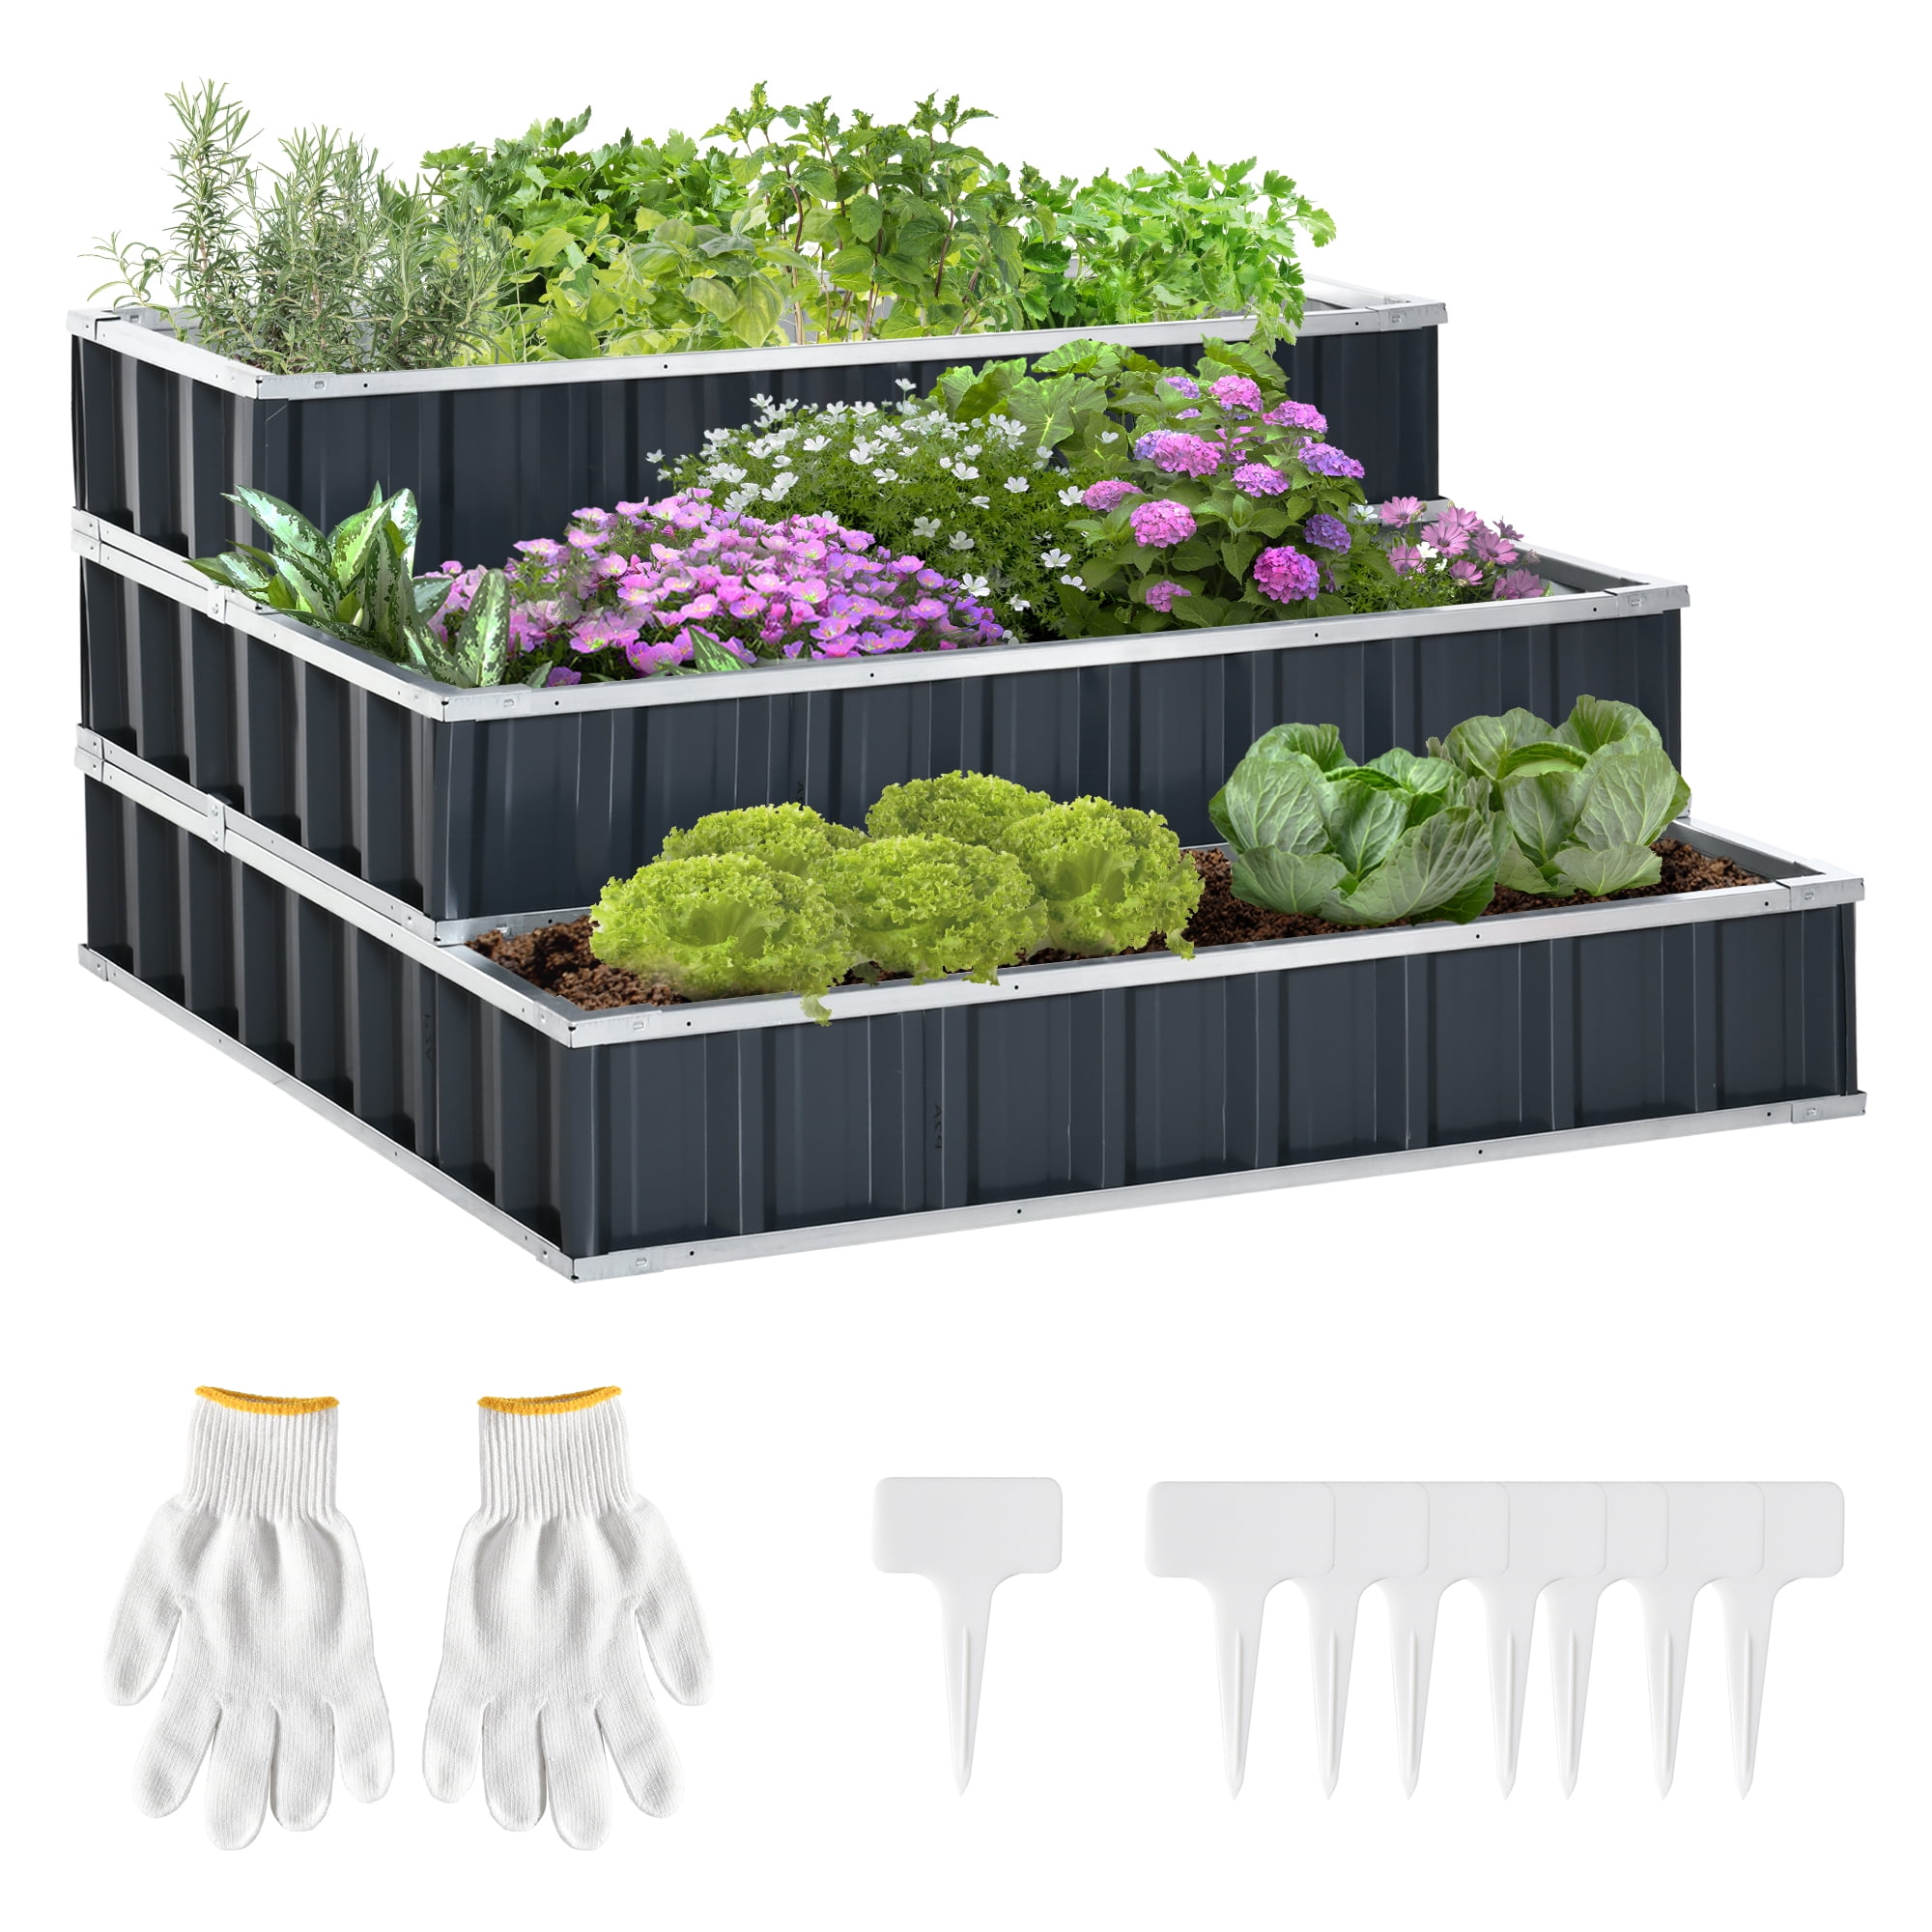 vidaXL Raised Garden Bed with 4 Removable Plastic Inner pots 31.1 x 8.7 x 29.9 Planting Flowers Vegetables and Herbs Elevated Planter Box for Backyard and Patio 